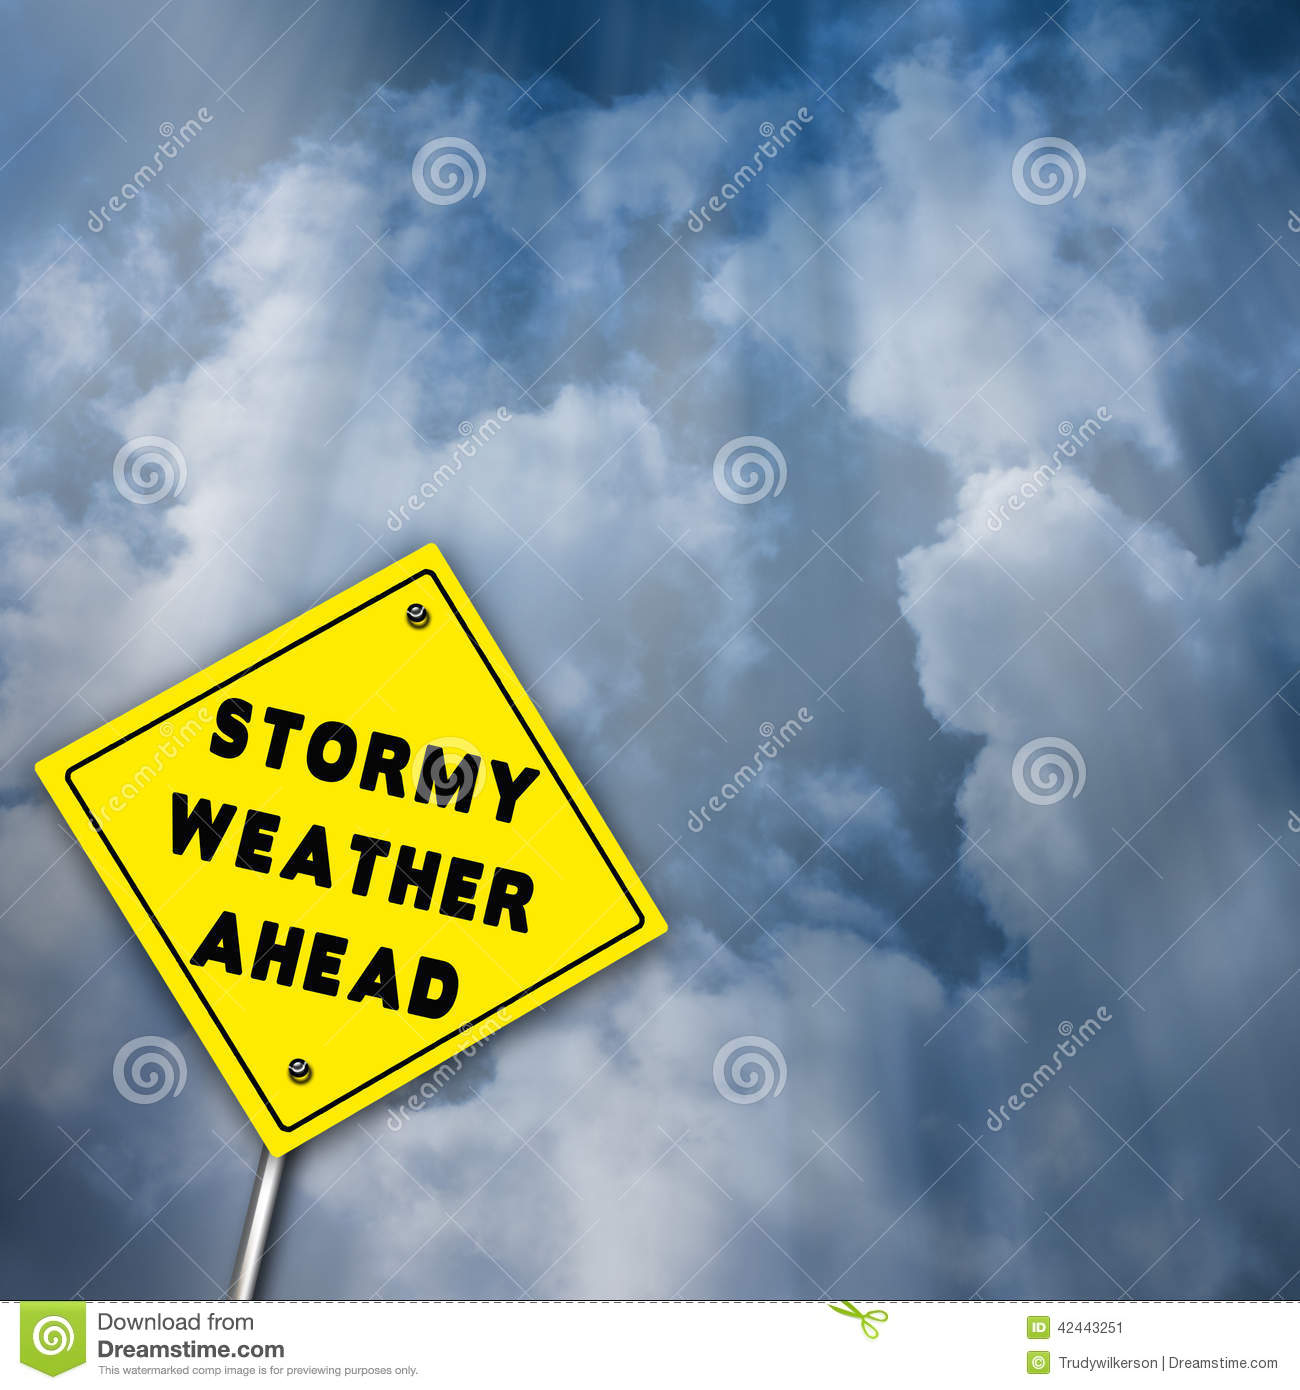 Stormy Weather Ahead Sign